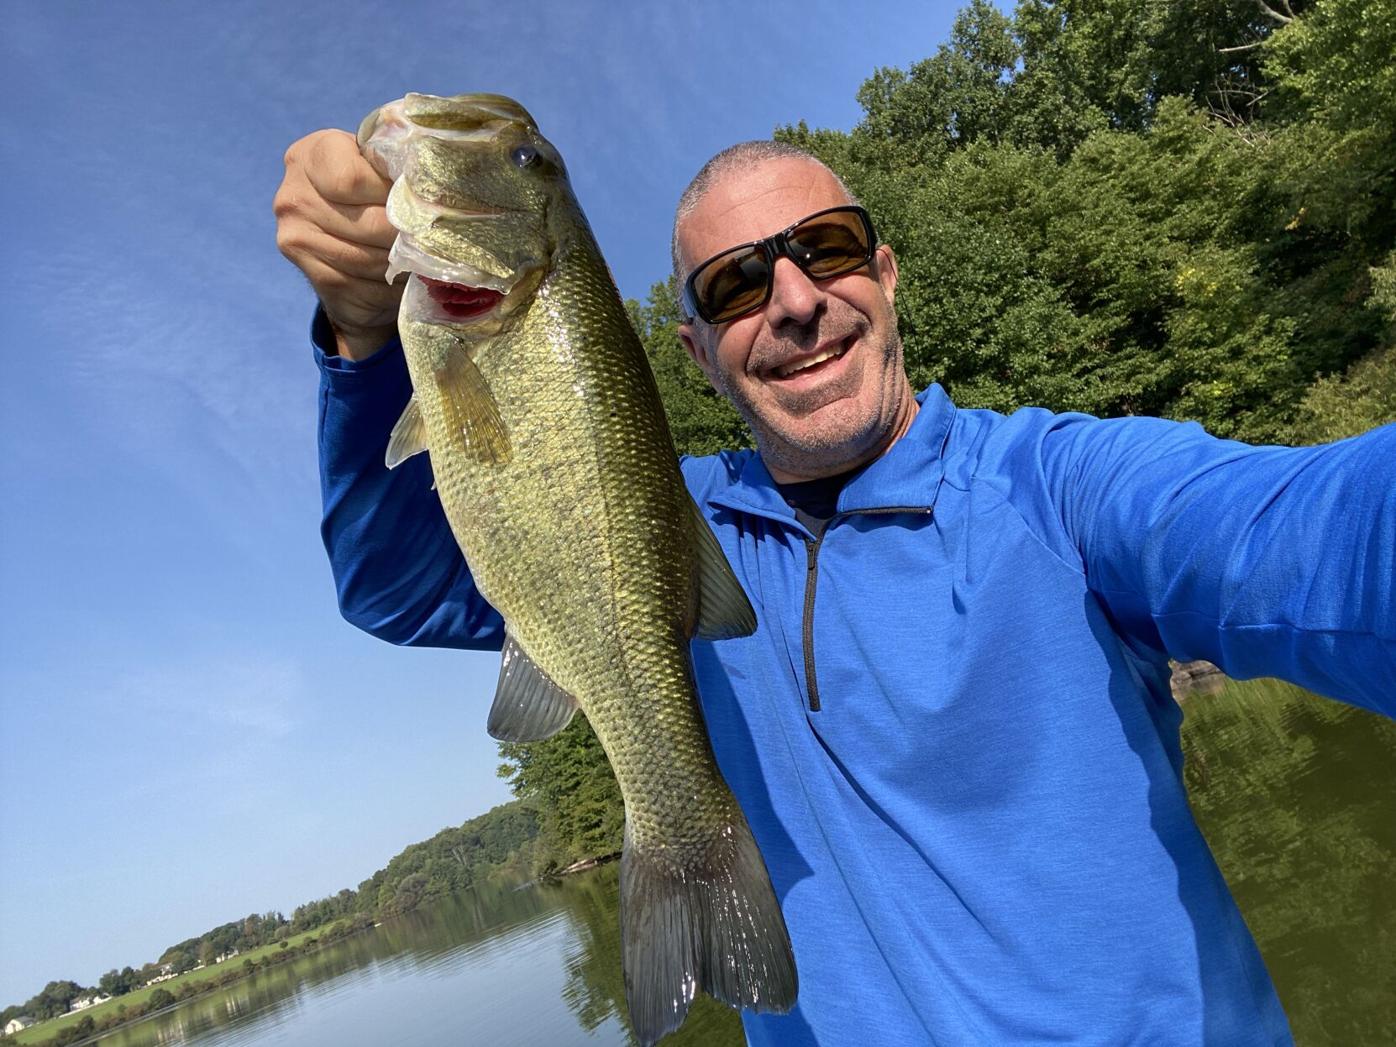 In search of the rare (to PA) 10-pound largemouth bass [column], Outdoors